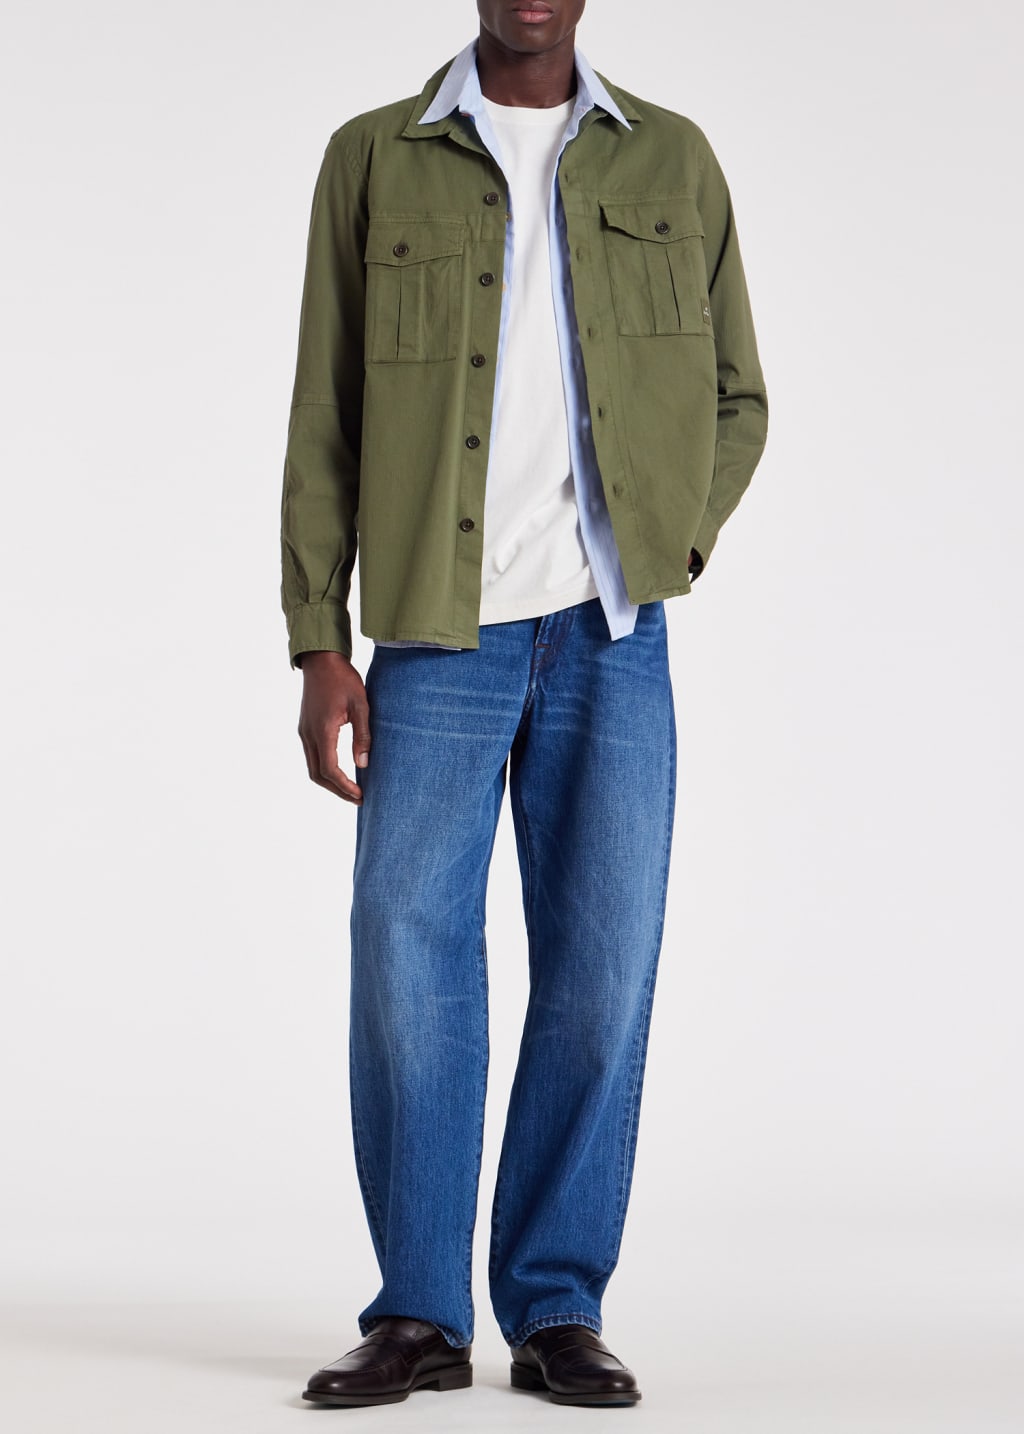 Model View - Relaxed-Fit Mid Blue Jeans Paul Smith